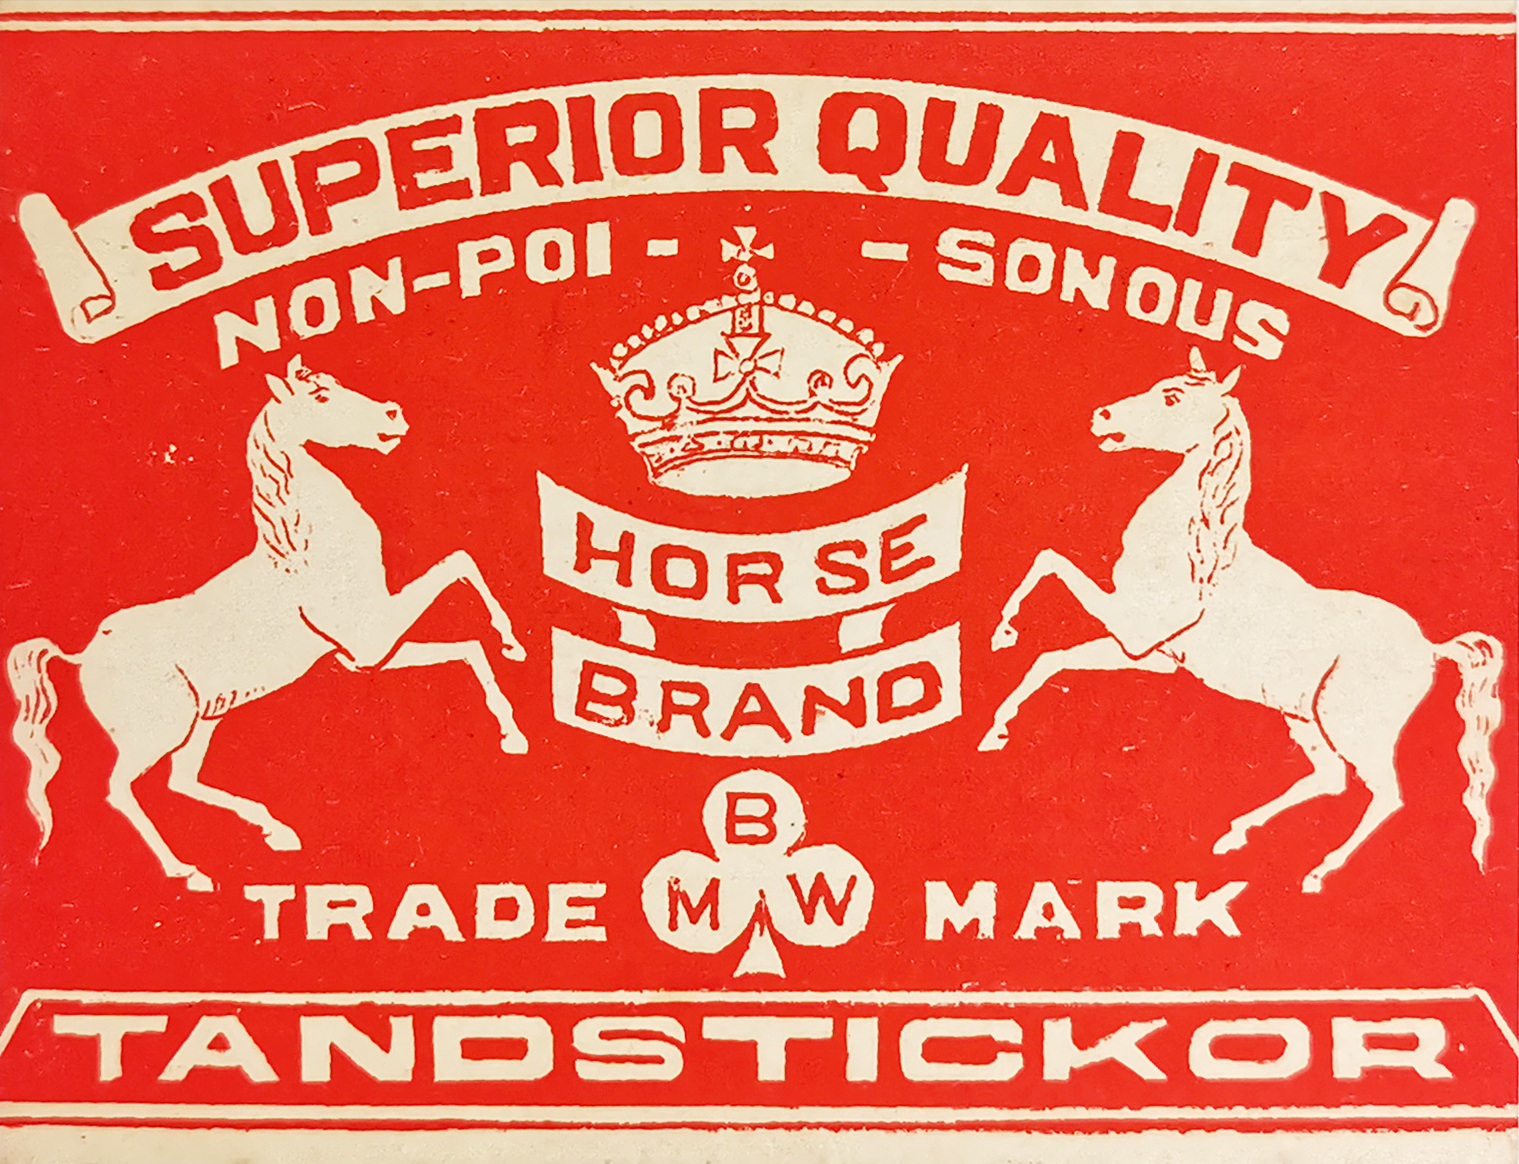 Horse Brand - Antique Print from 1920